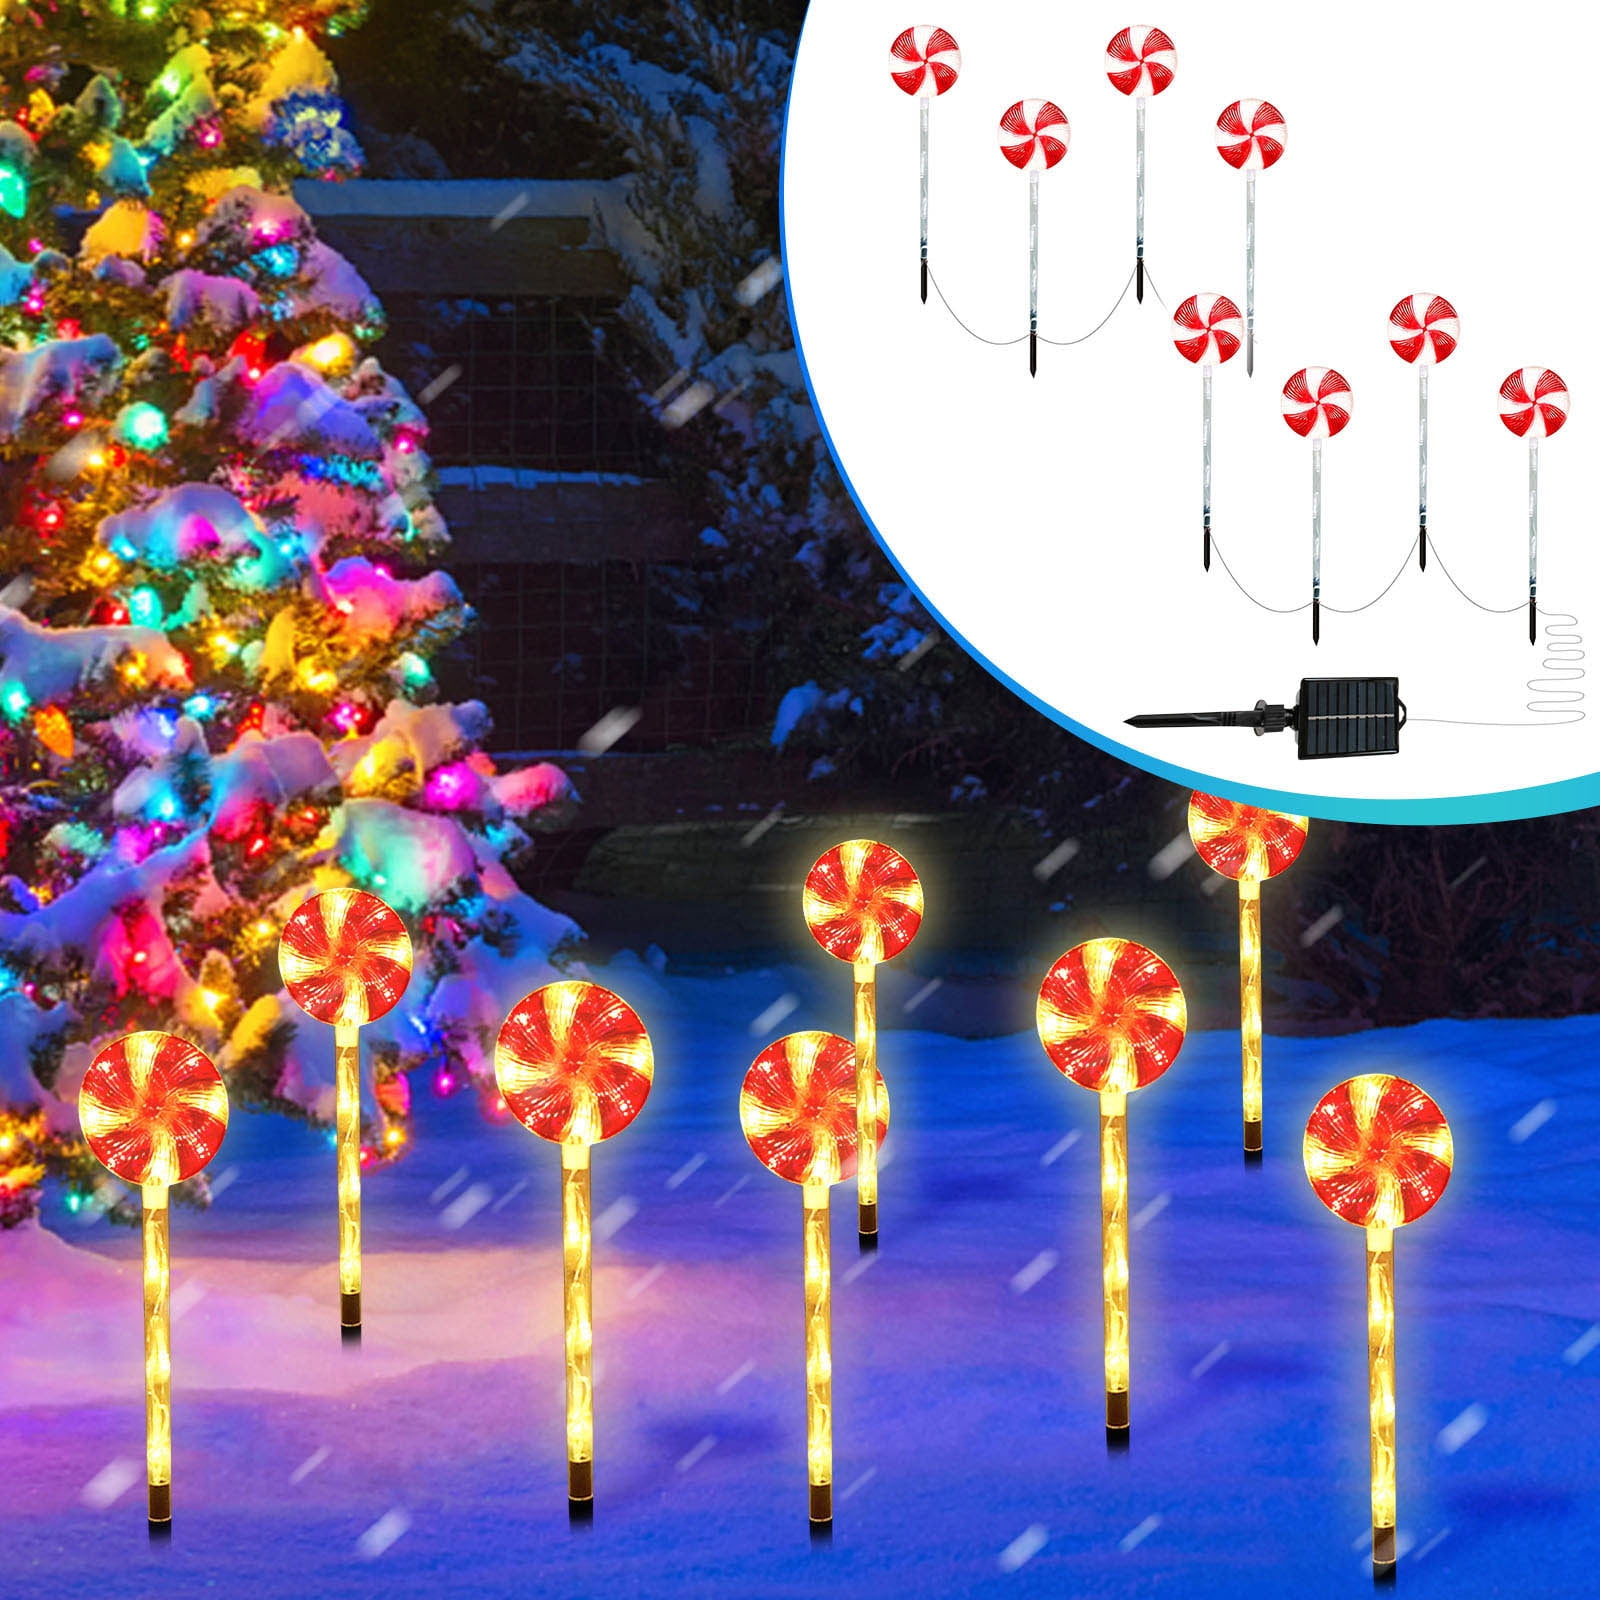 Augper Clearance Christmas 8 Pack Christmas Pathway Lights Candy Cane ...